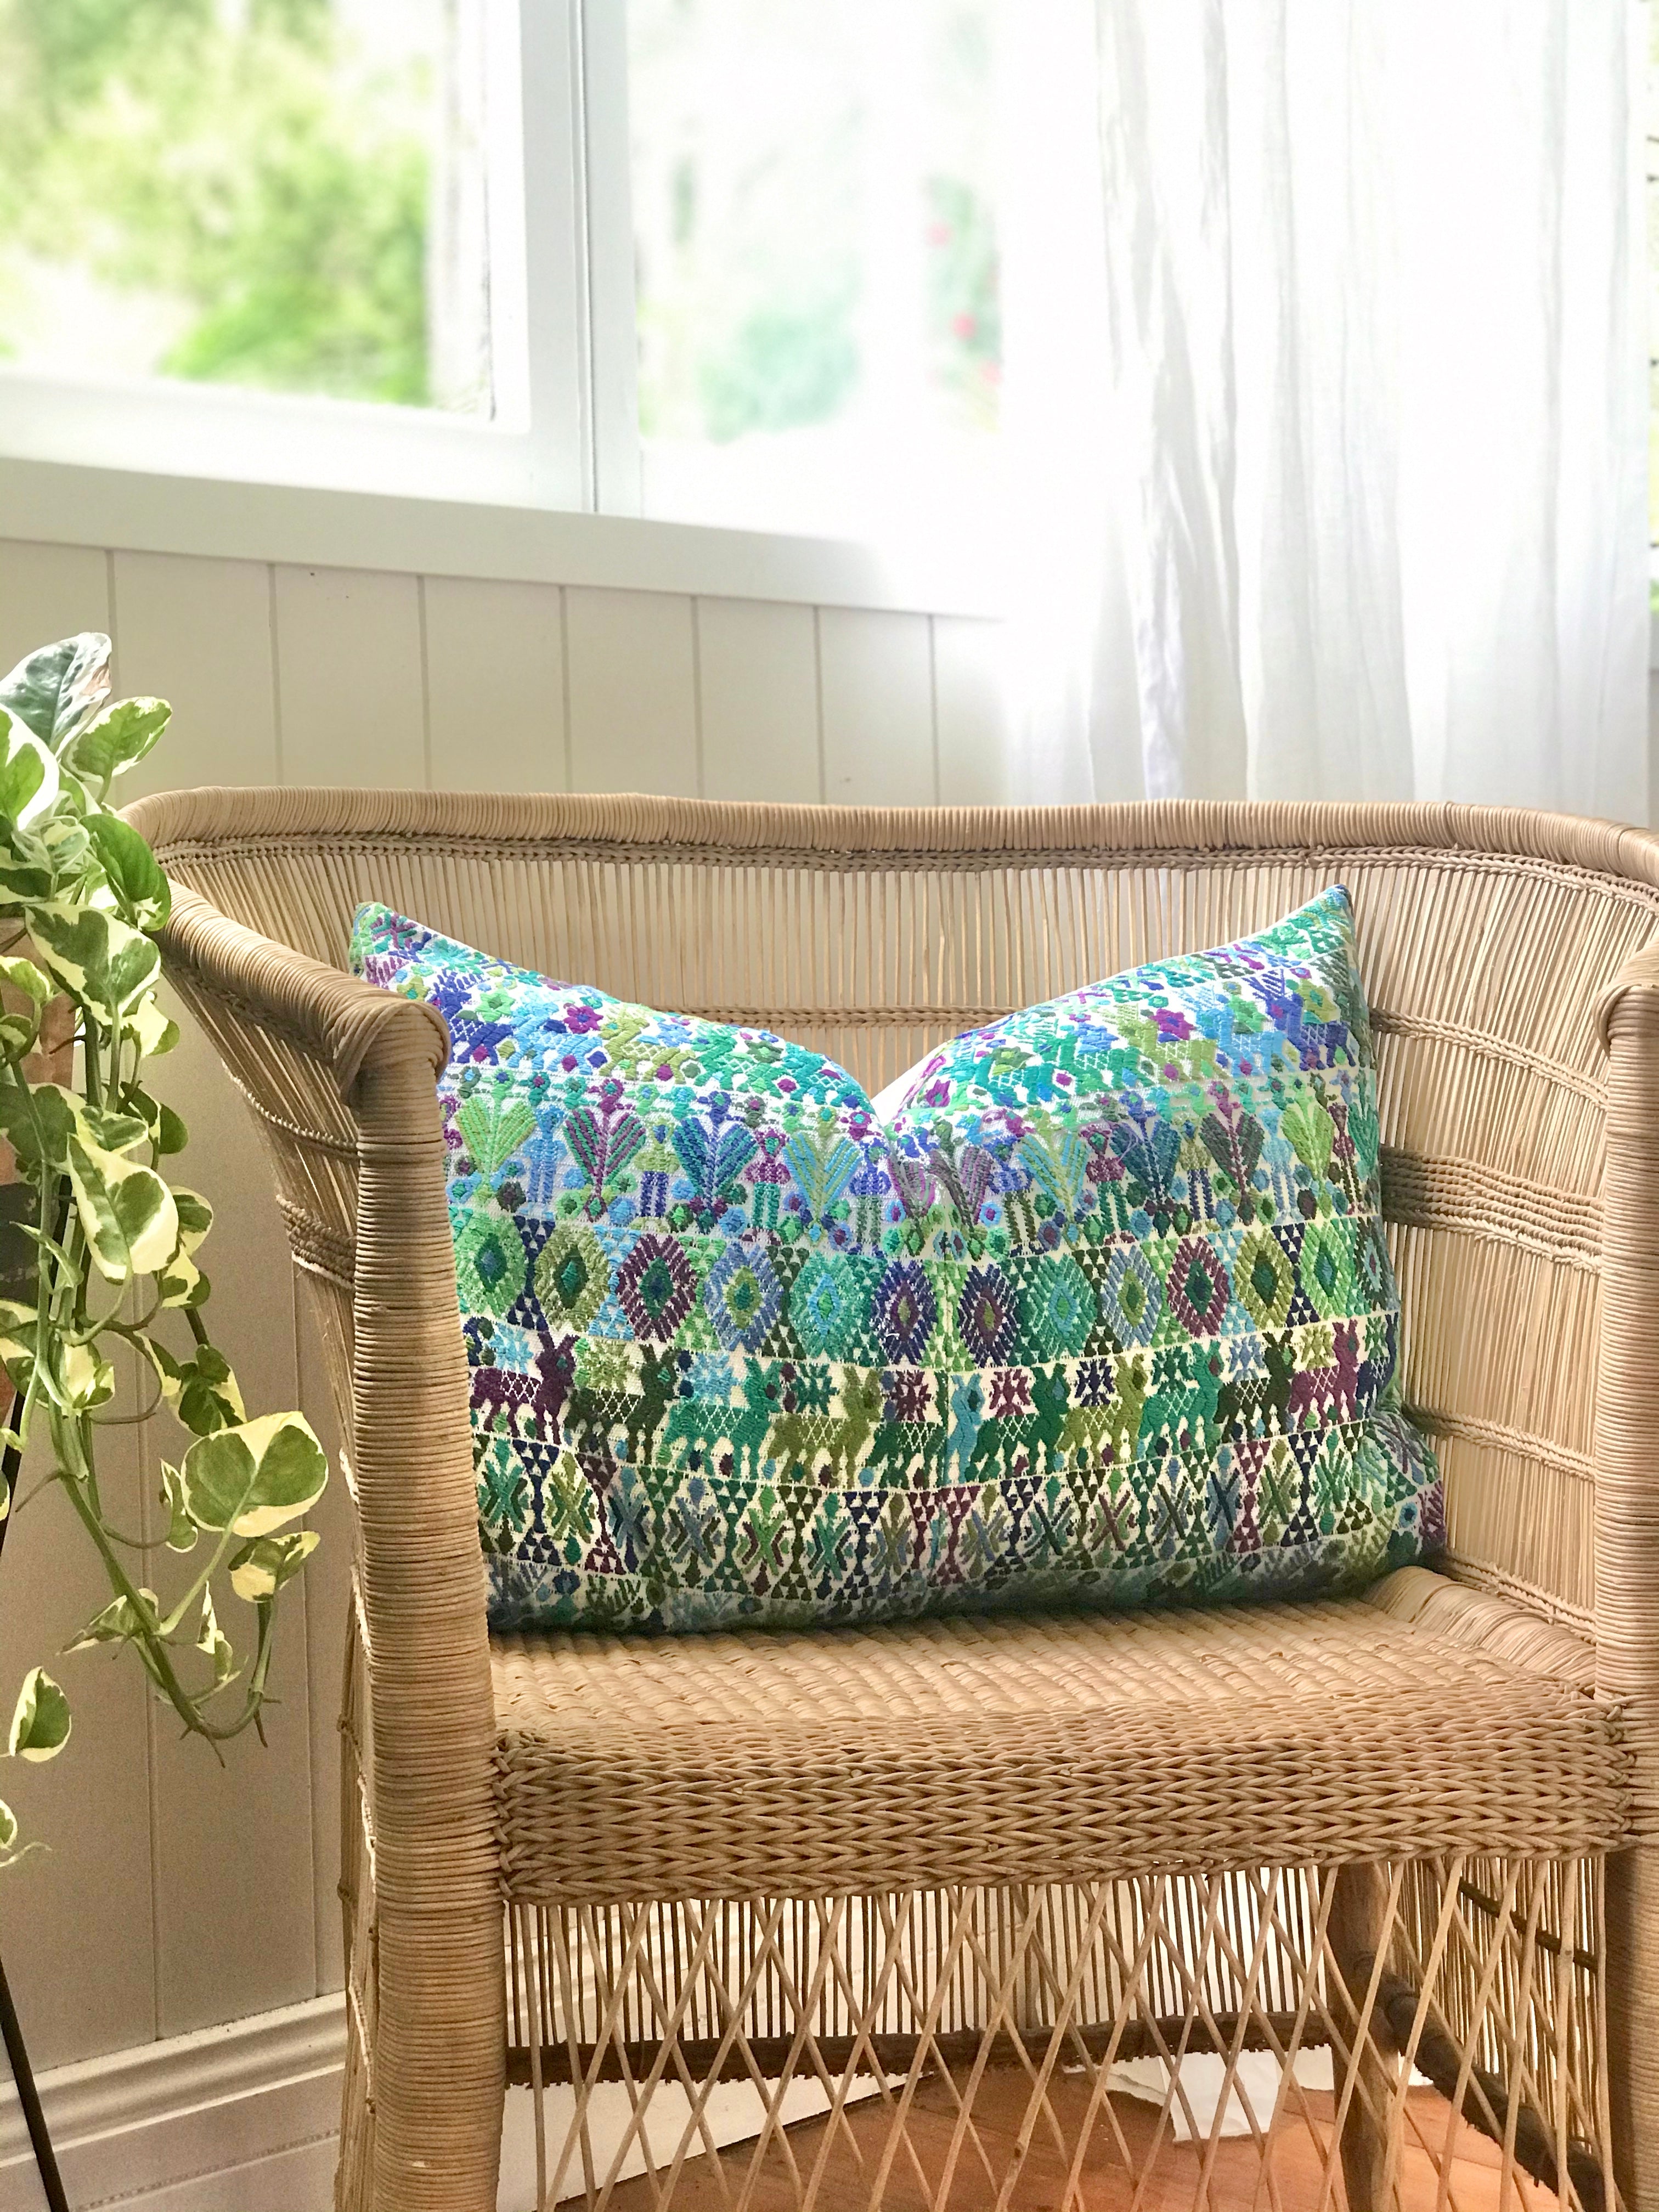 Guatemalan Huipil Textile Pillow, vintage, hand embroidered blue bohemian cushion from Coban